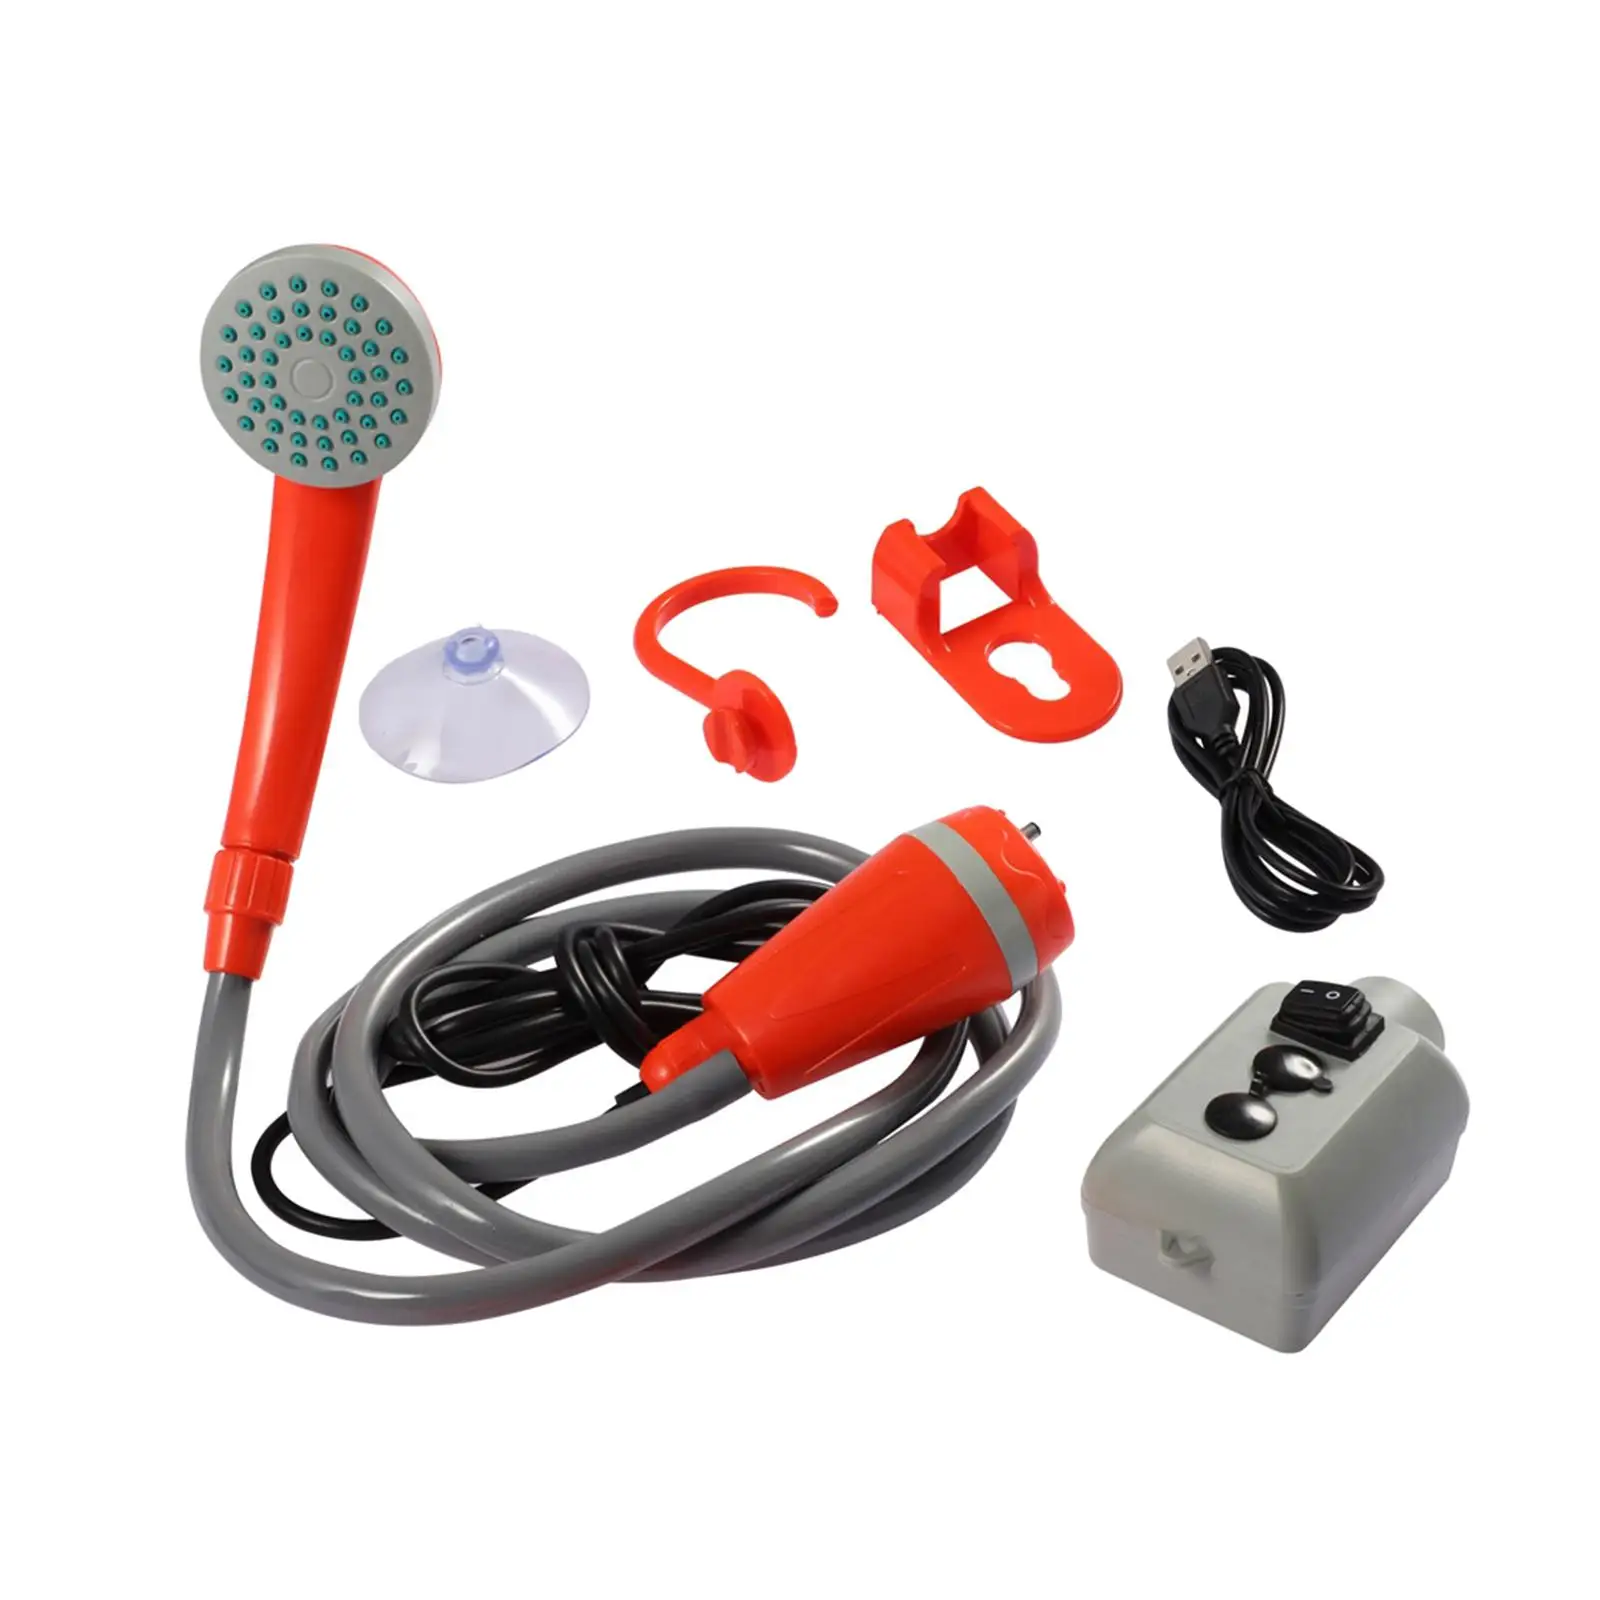 Portable Camping Shower Pump Compact 12V for Dog Cleaning Hiking